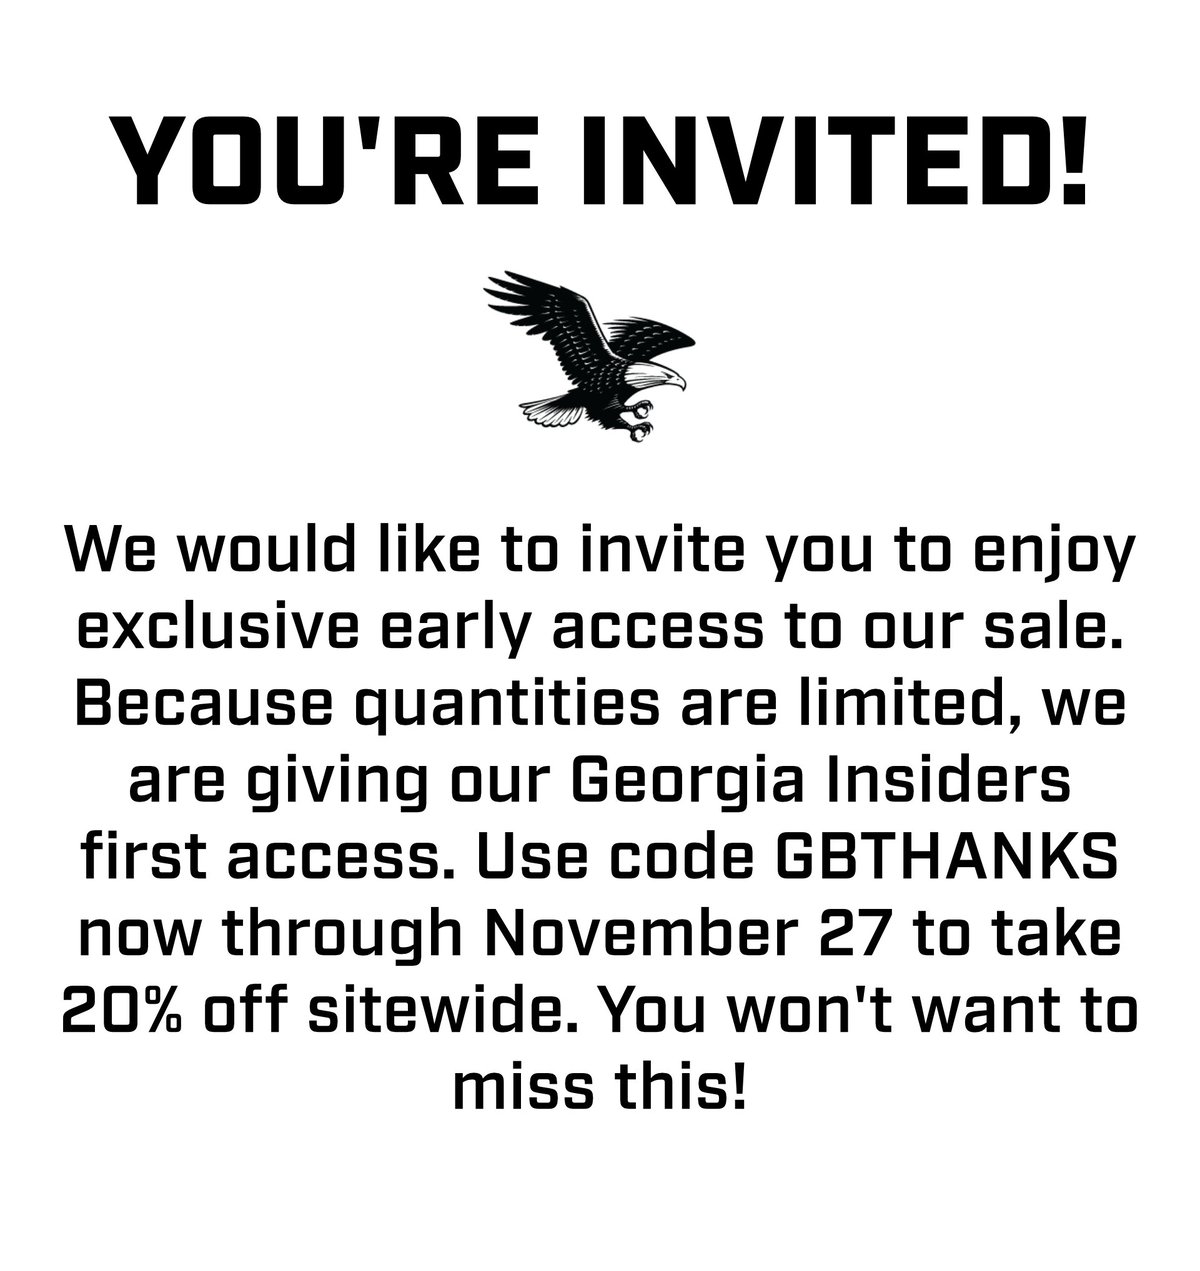 You're invited to enjoy exclusive early access to our sitewide sale now through 11/27/ Use code: GBTHANKS & get 20% off